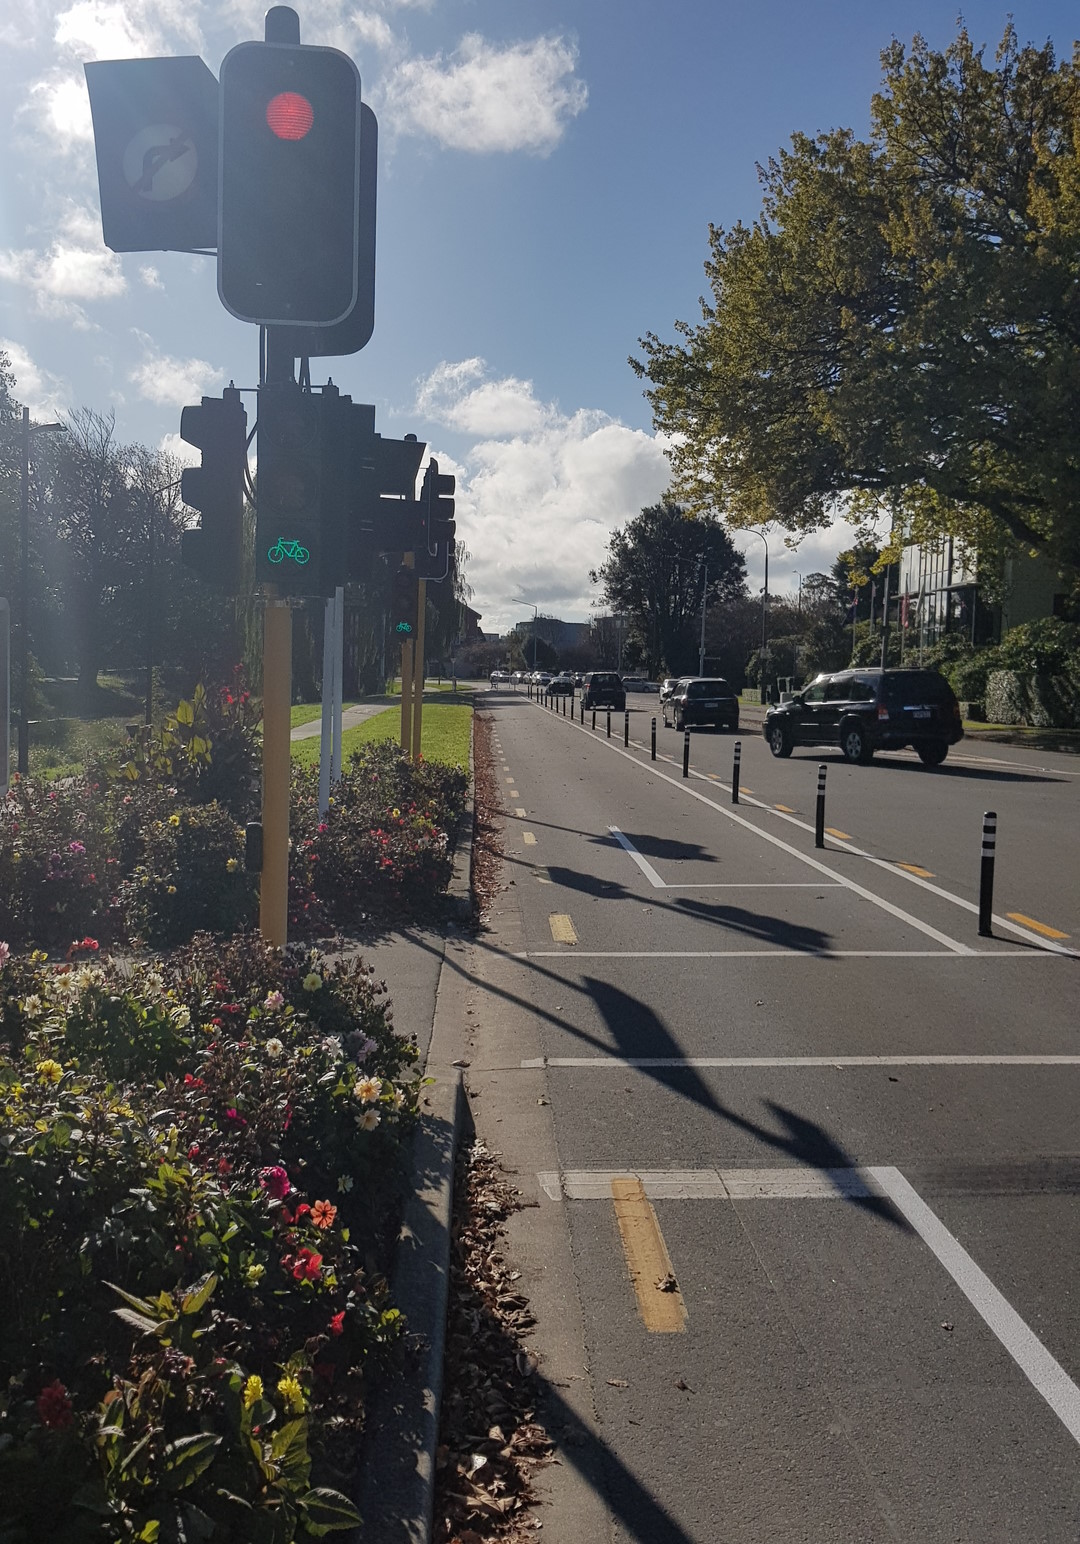 Cycling in Chch 2023 in Review: The Good, the Bad, the in-Between